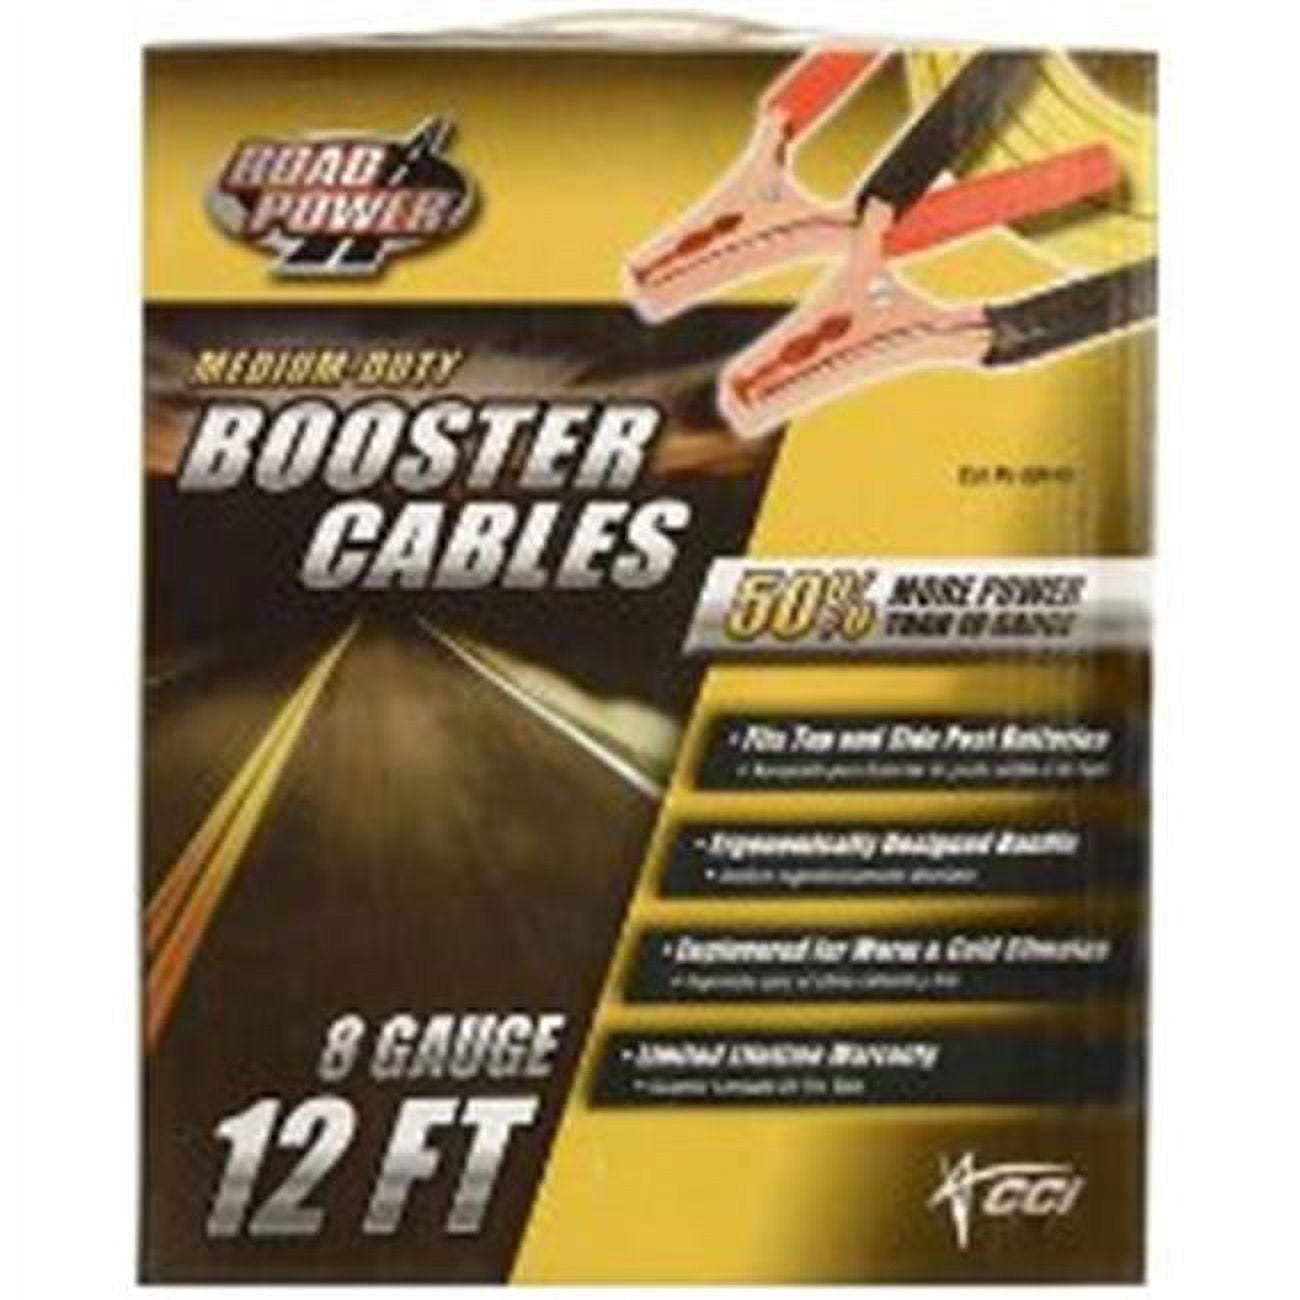 8445 12 Ft. 8 Gauge Booster Cable